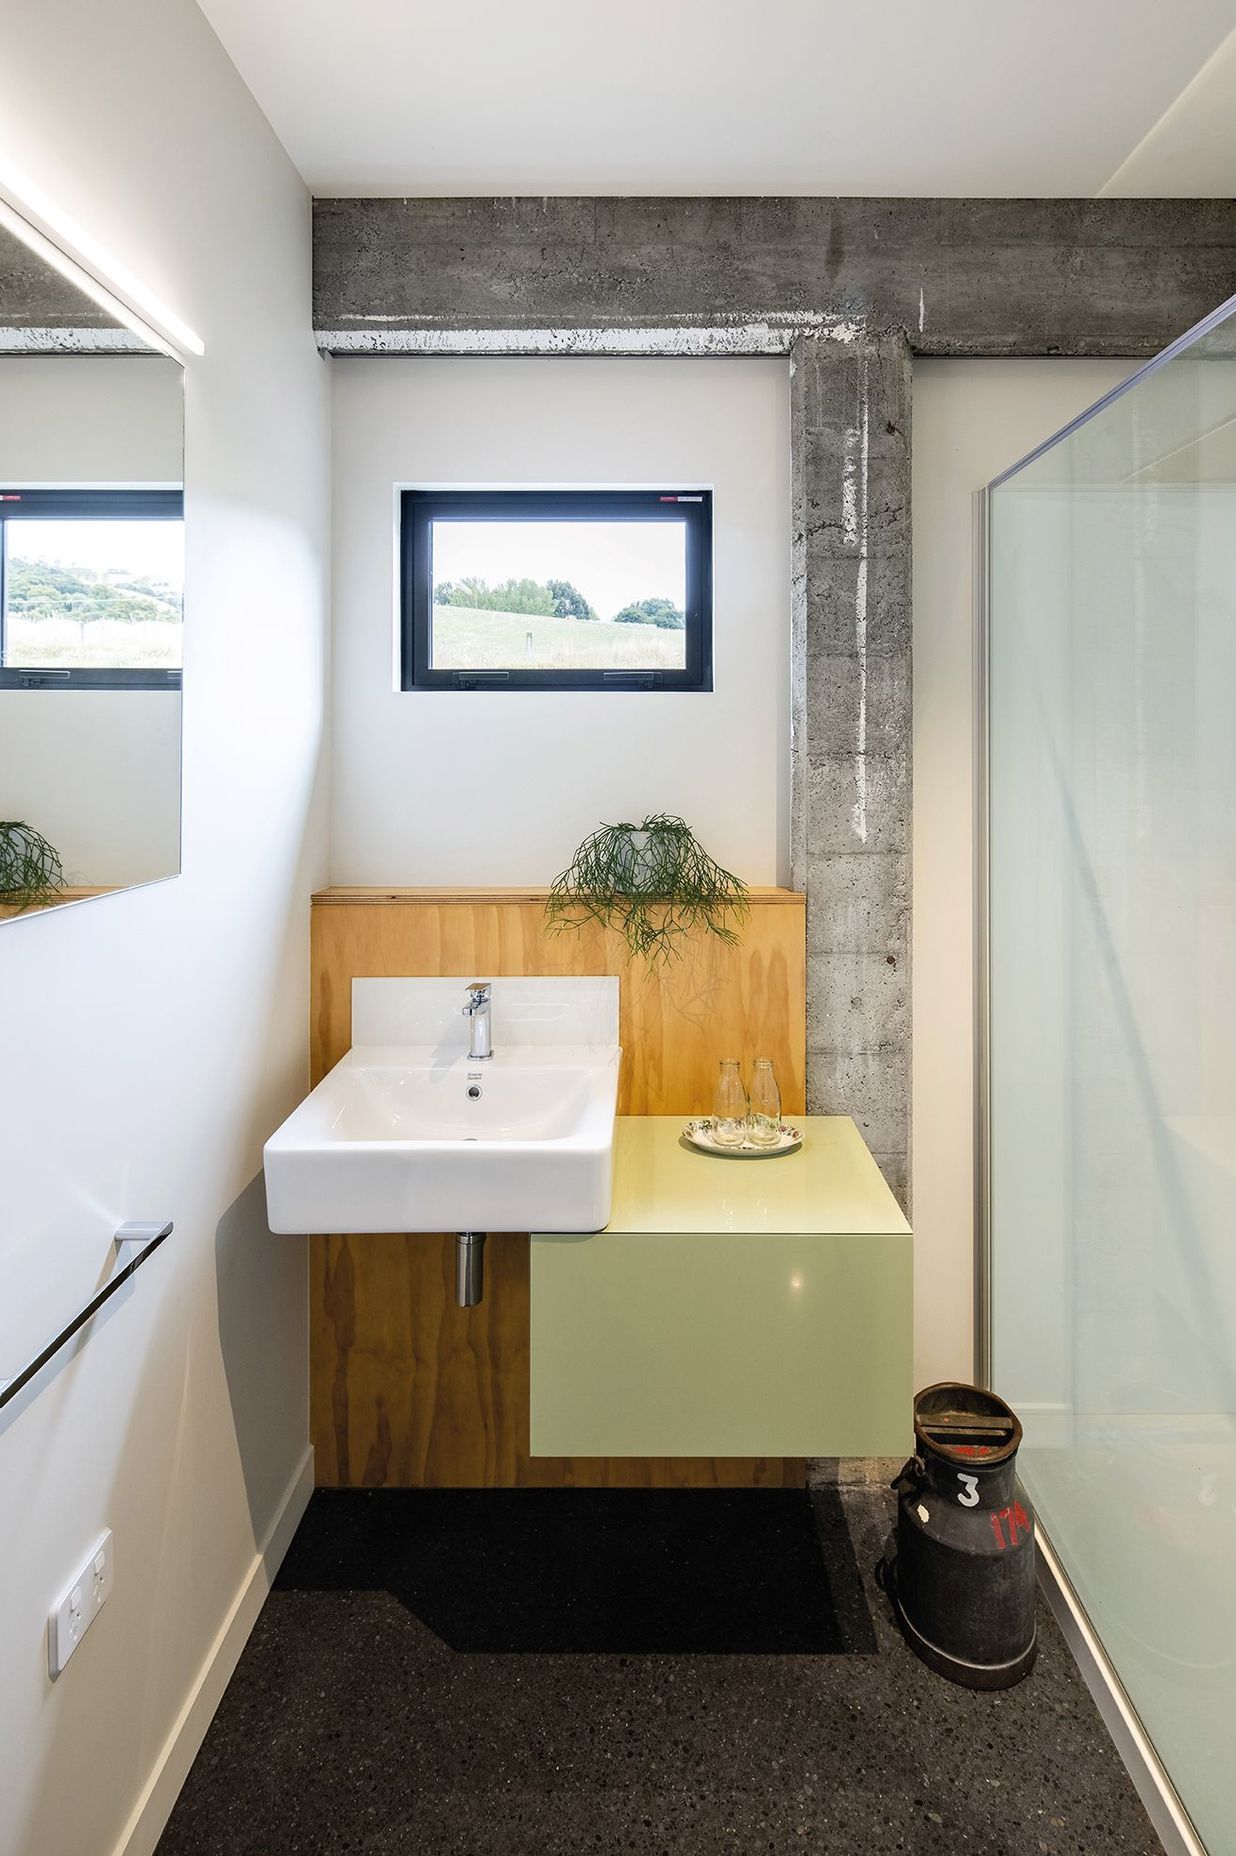 While the concrete frame has been cleaned and patched it still bears the marks of age, contrasting with the new elements, such as in this bathroom.